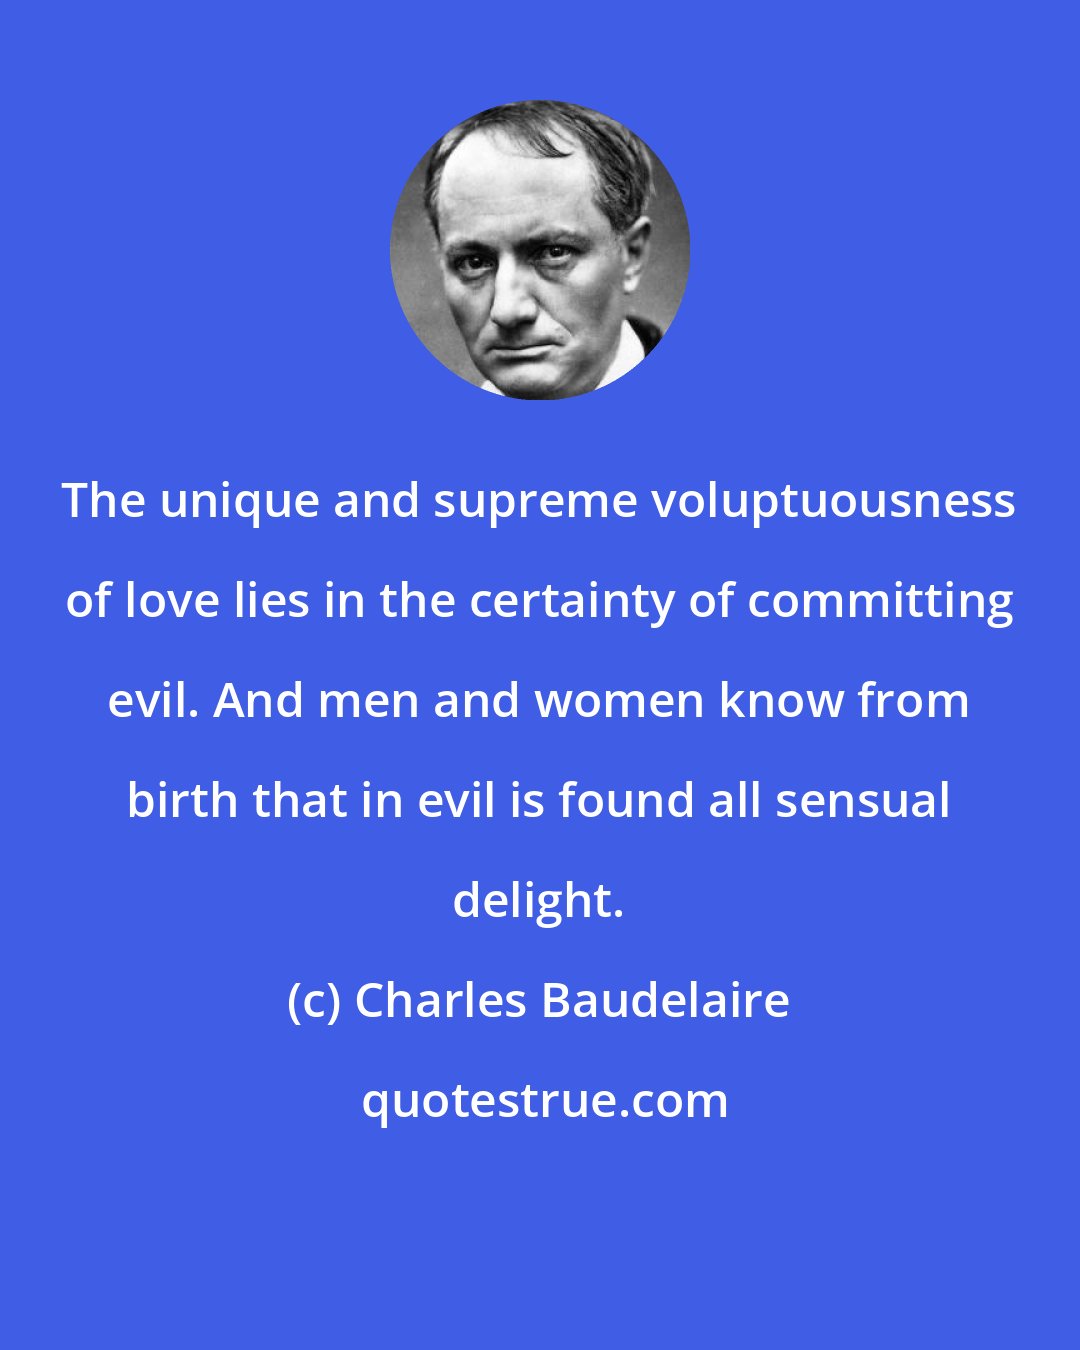 Charles Baudelaire: The unique and supreme voluptuousness of love lies in the certainty of committing evil. And men and women know from birth that in evil is found all sensual delight.